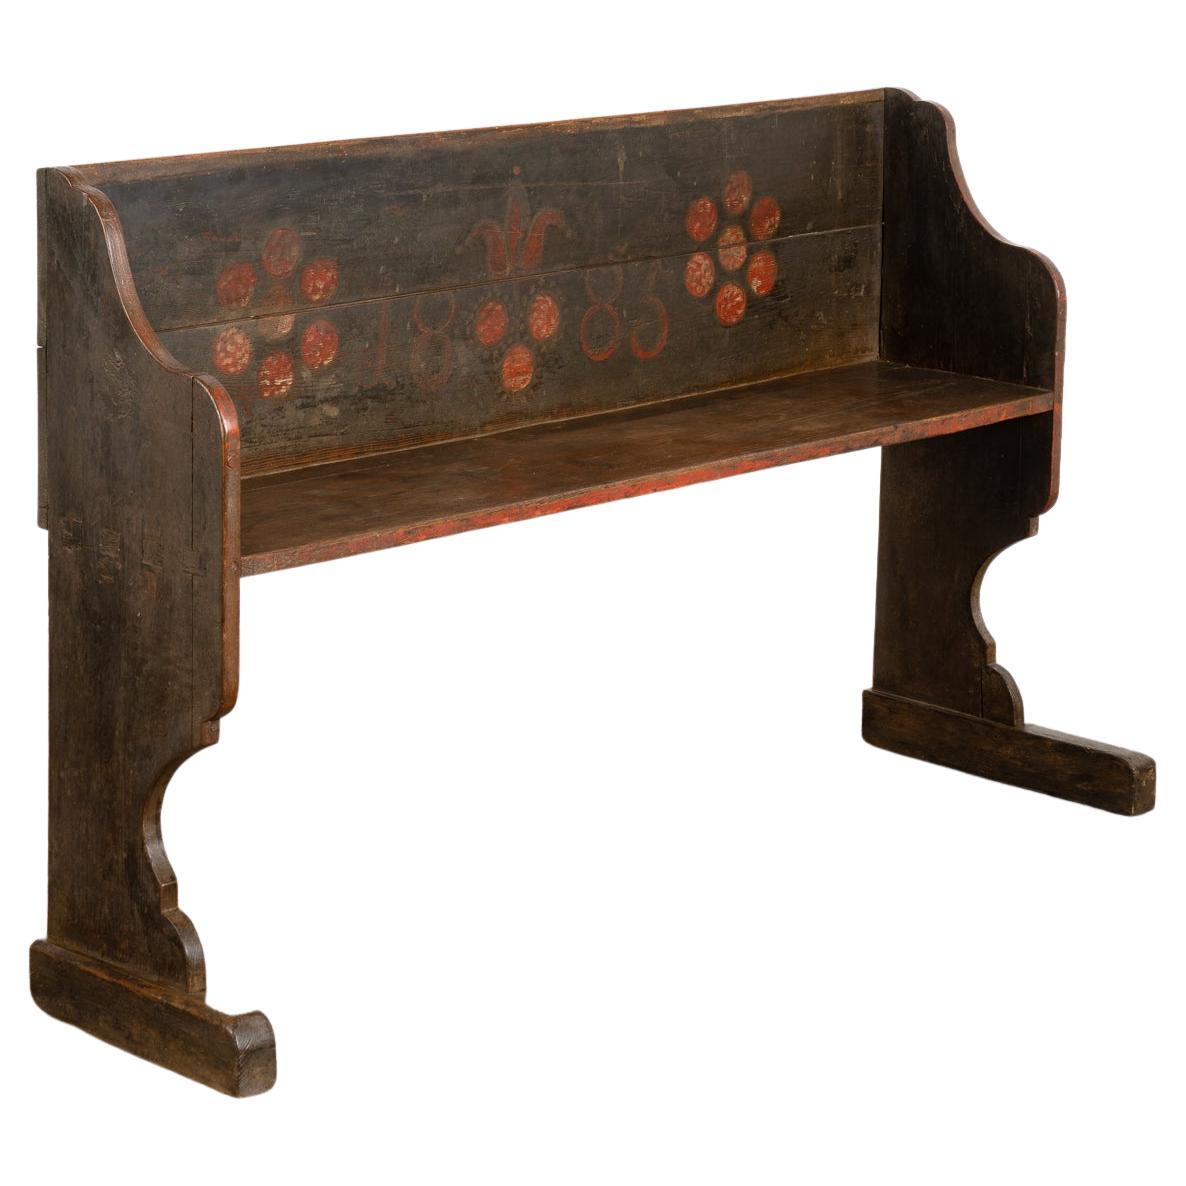 Original Hand Painted Narrow Bench with Red Flowers, Hungary, Dated 1883